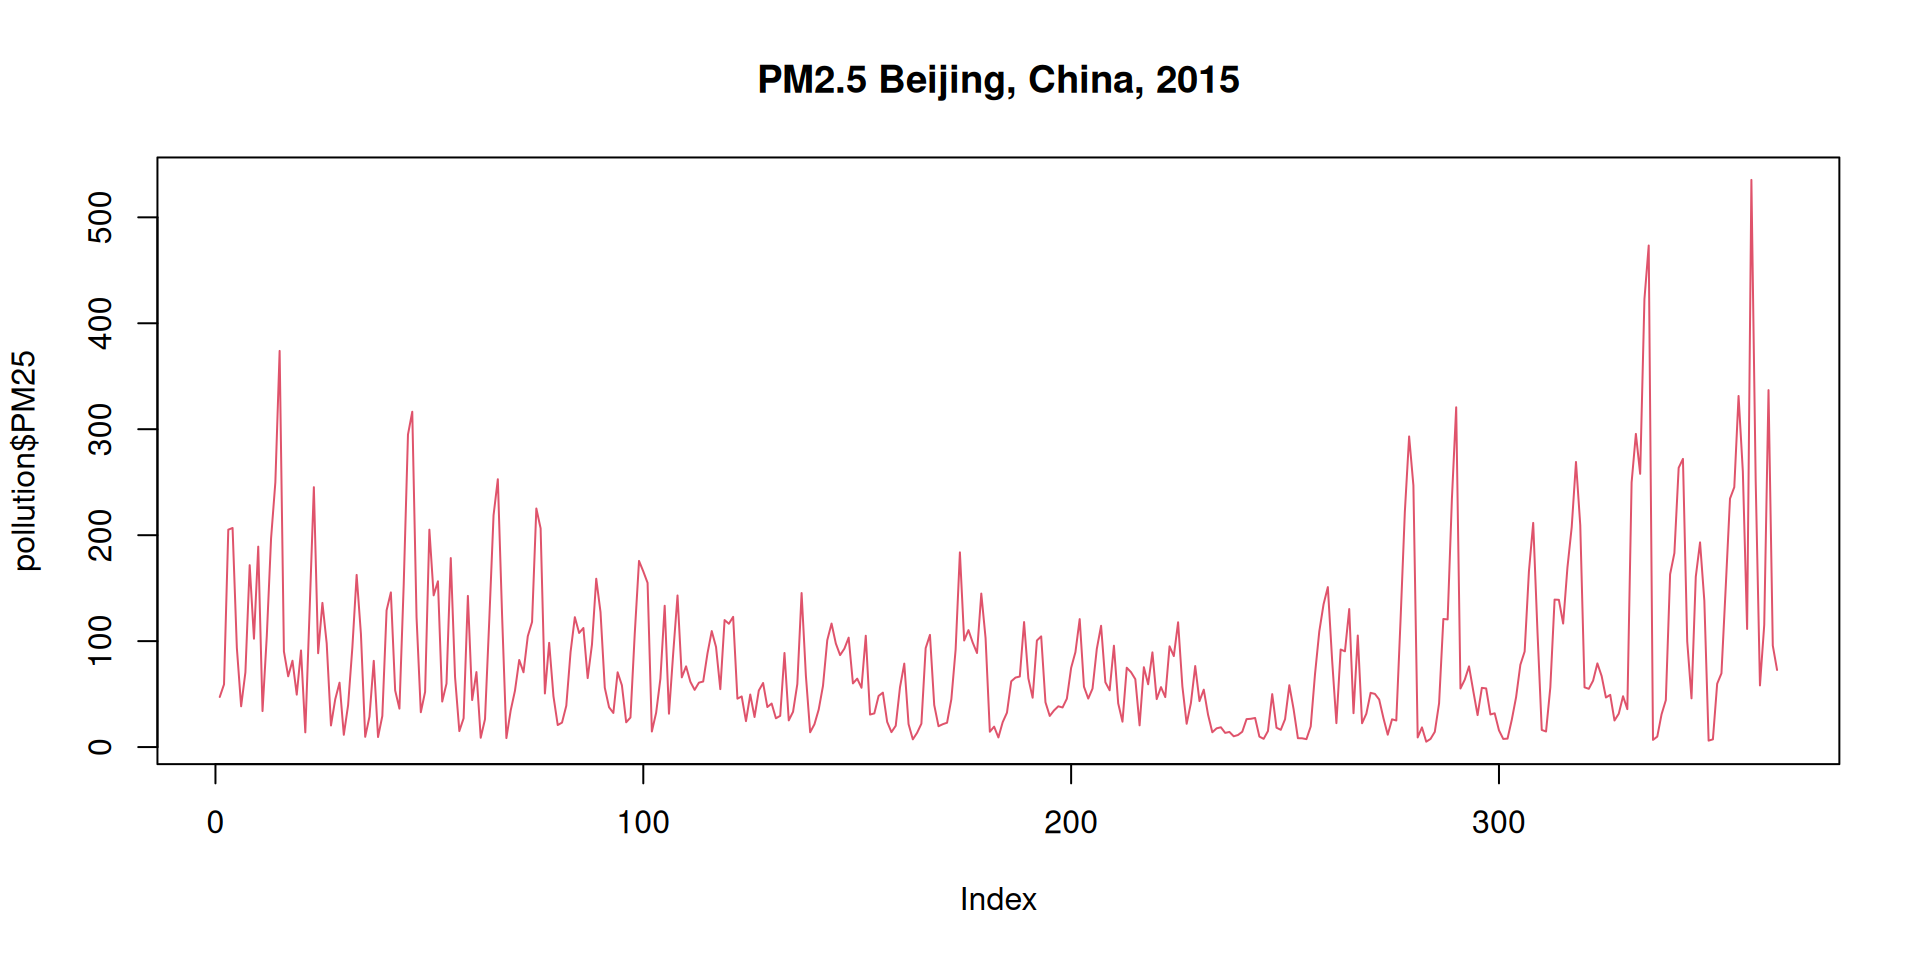 Daily mean PM25 concentration in Beijing over entire 2015.